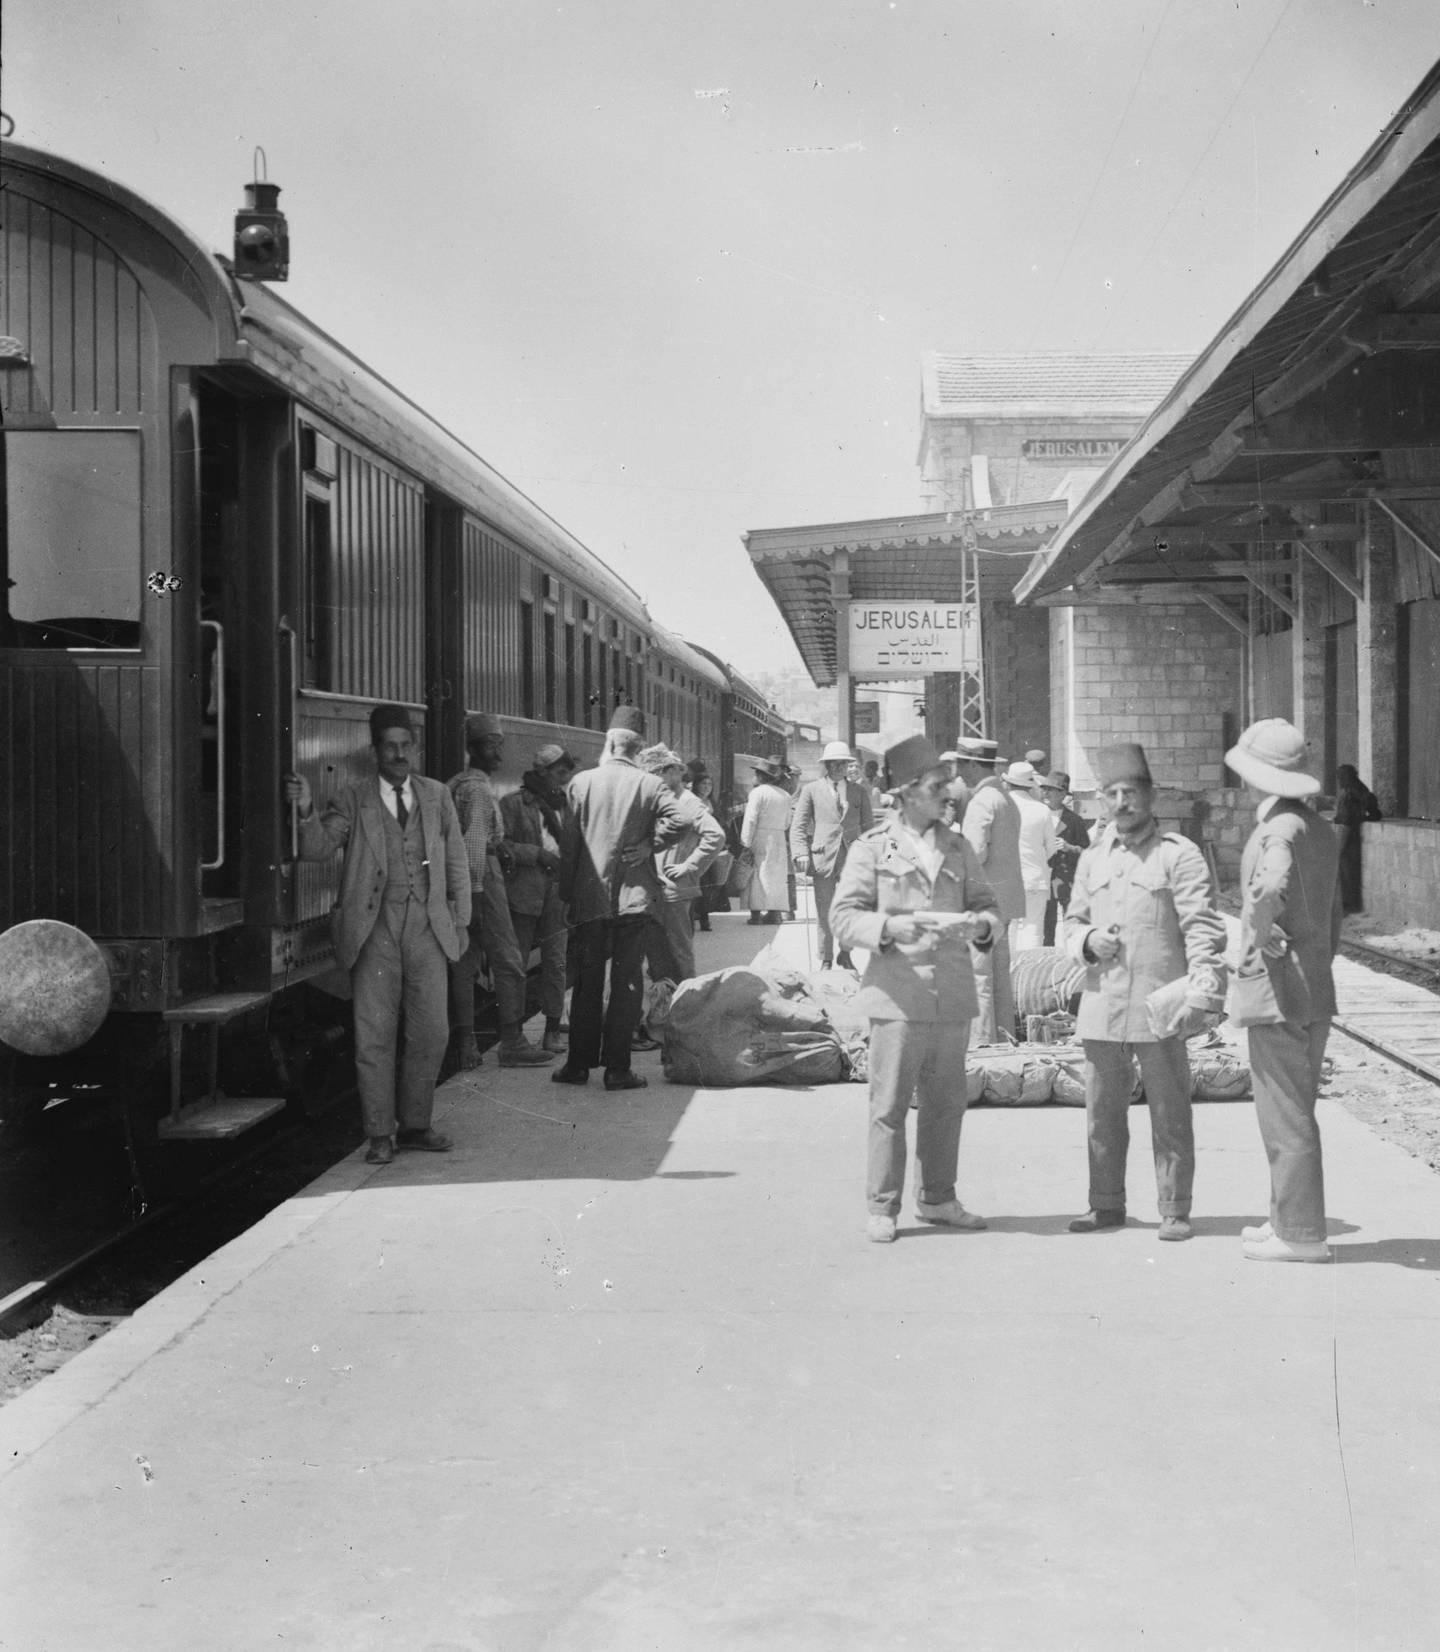 The train to Damascus at Samakh station, at the southern tip of the Sea of Galilee, early 1920s. Credit - LoC Matson Collection 05548